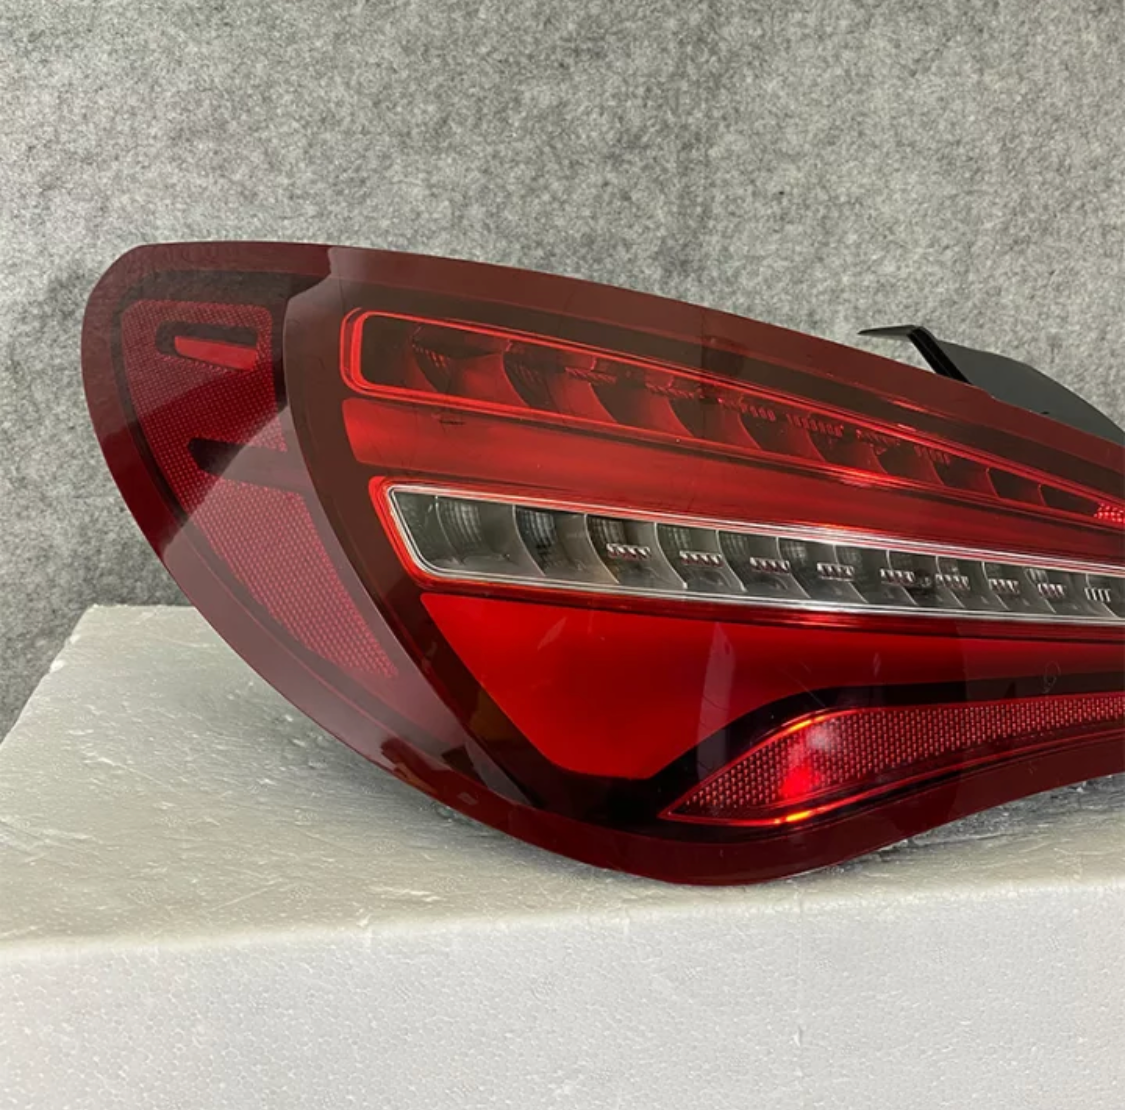  Mercedes Benz CLA Class/ CLA45 Updated LED Plug and Play Rear Taillight Units - Manufactured using high-quality ABS Plastic with LED Technology to produce a streamlined and up to date look for your CLA Model. This product fits the W117 CLA Models between 2014-2018. 